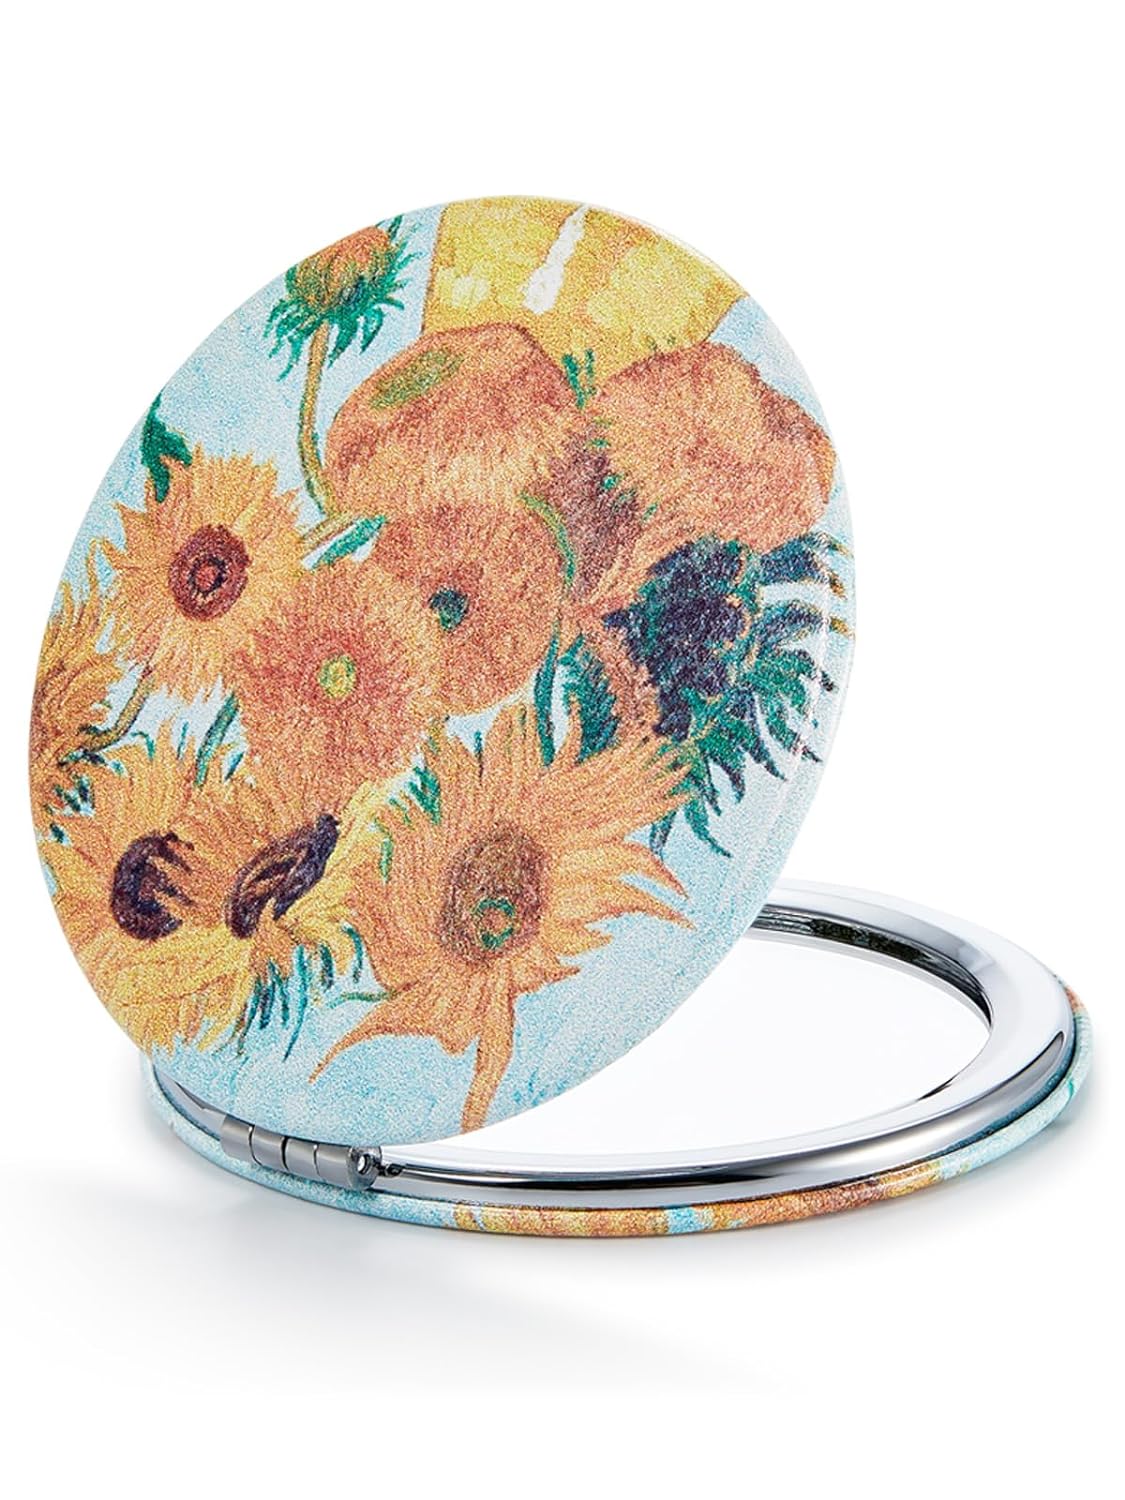 OMIRO 1X/10X(300R) Compact Magnifying Mirror, Unique Painting Pocket Mirror with Classical PU Leather (Round，Flamingo and Tropical Print)